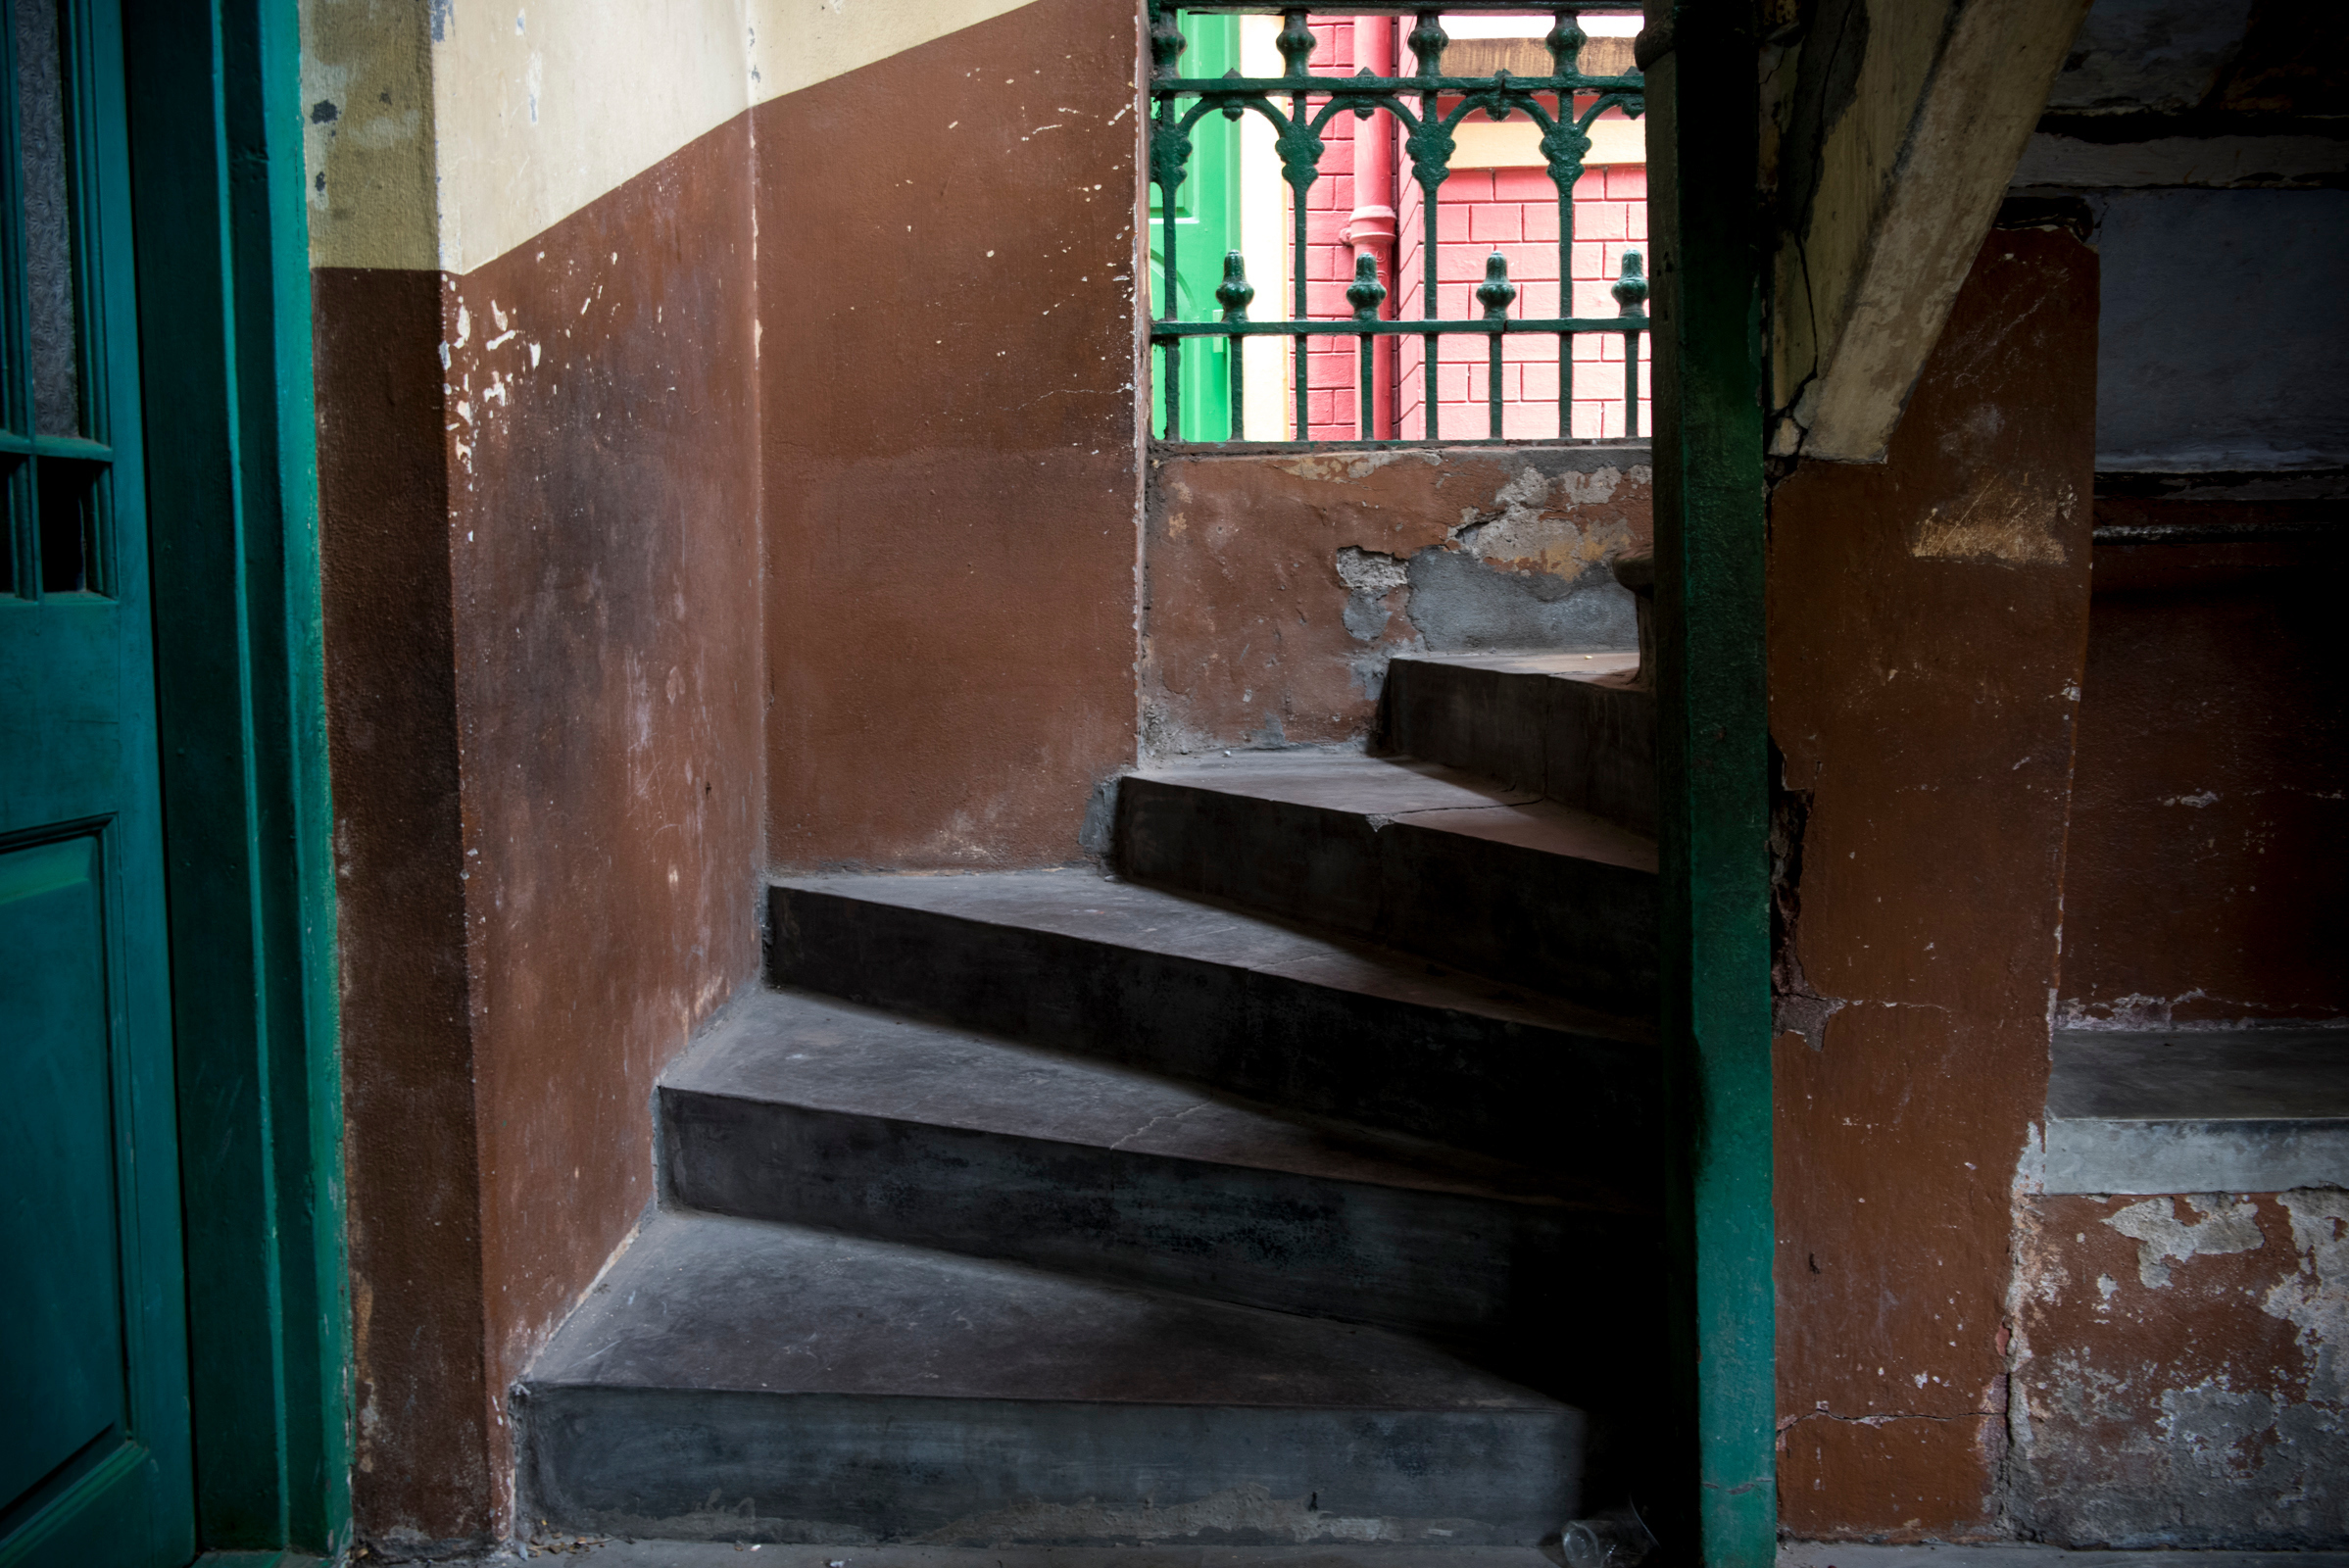 KOLKATA, INDIA 1 SEPT: Images from the Saint Teresa School, located about 200 meters from the Mother House of the Missionaries of Charity. Mother Teresa taught at the school, and began her first efforts at serving the poor from a stairwell within the school. She provided medicine for those who were unable to afford it. PICTURED: The actual stairs that Mother Teresa would sit upon and distribute medicine to those in need.